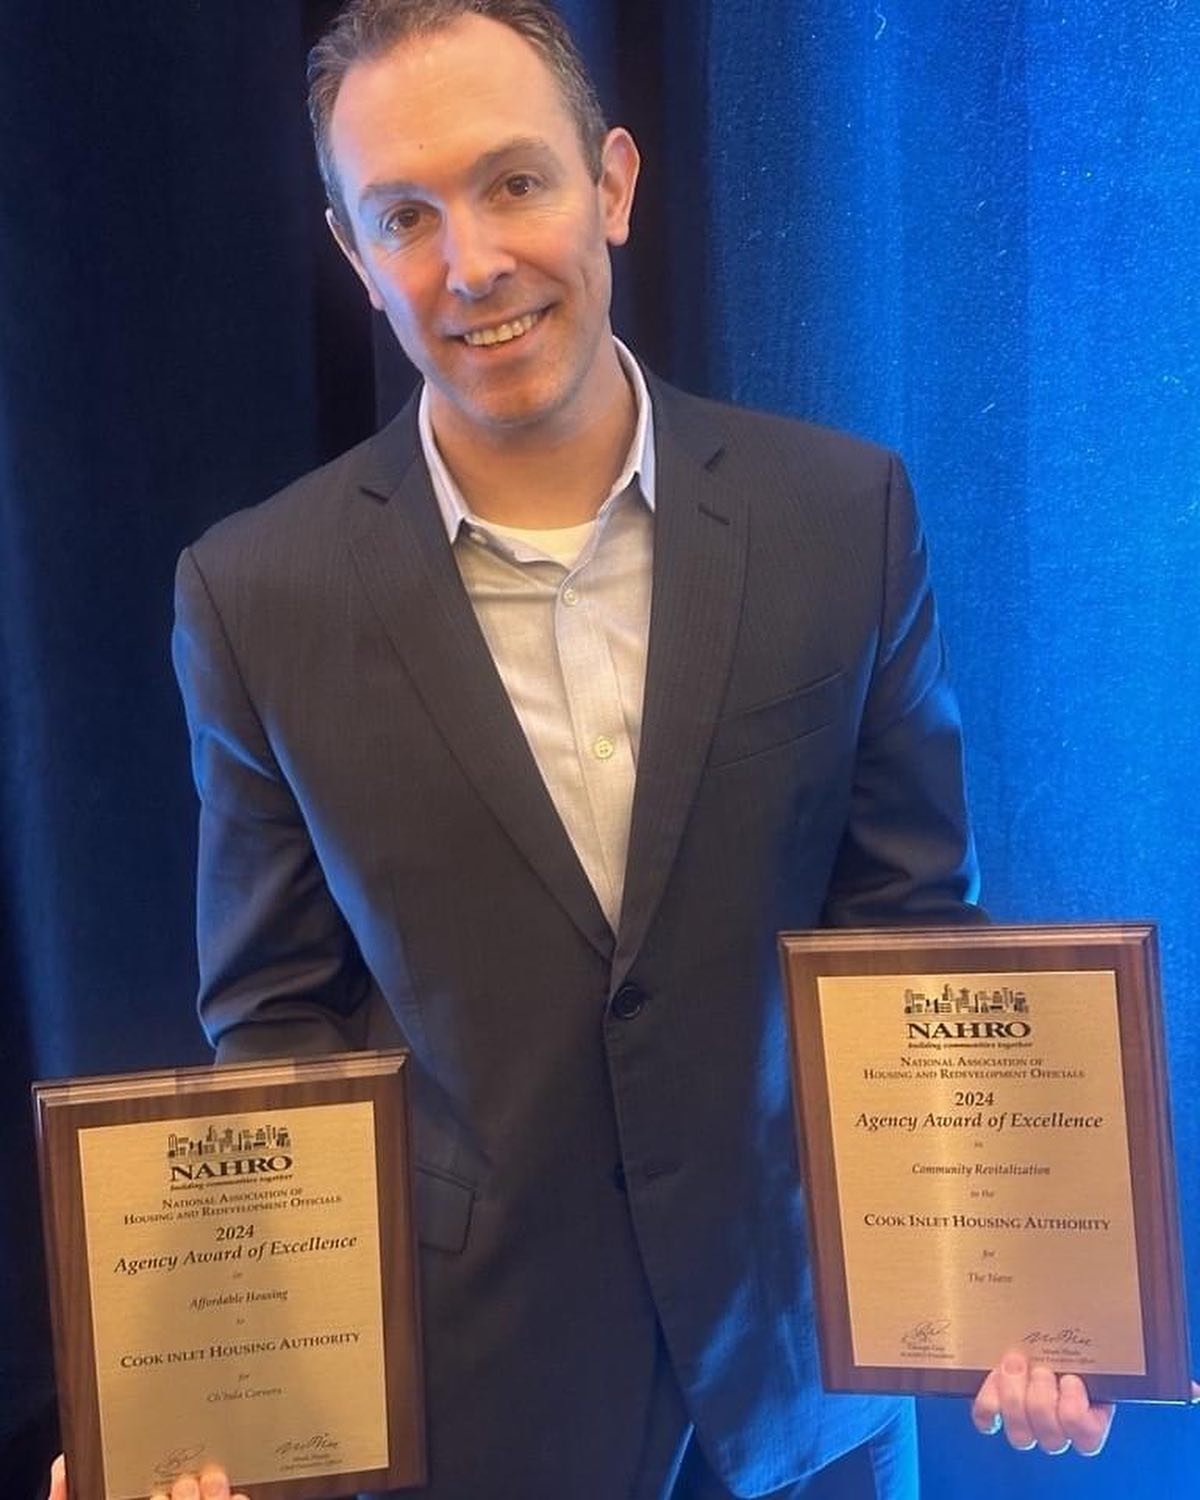 This week, Cook Inlet Housing Authority was honored during the National Association of Housing and Redevelopment Officials (NAHRO) Annual Conference in Washington, DC with two Awards of Excellence. These awards celebrate outstanding innovators and ac